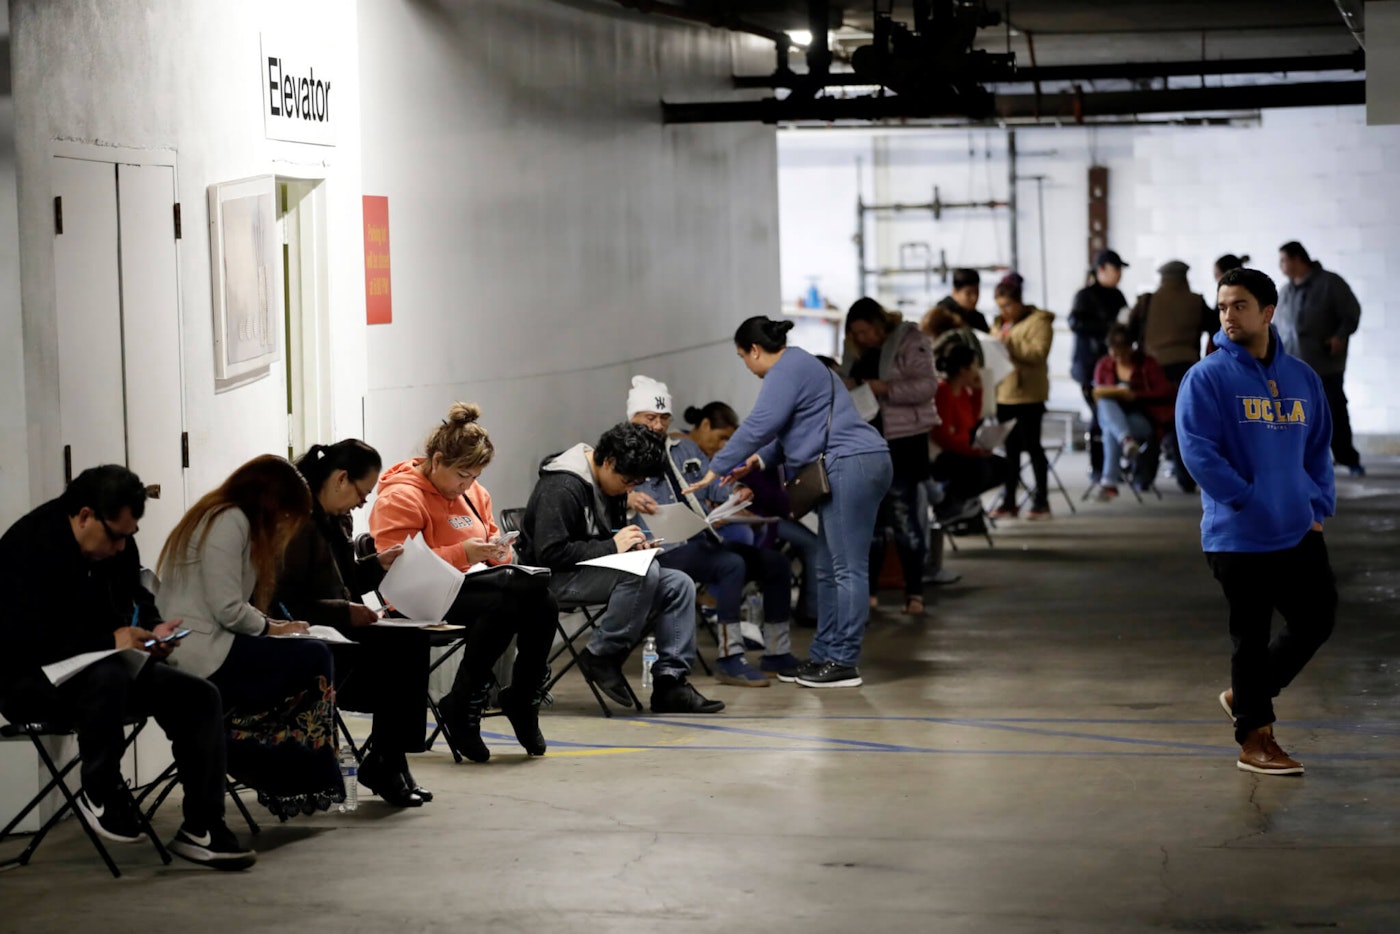 In this March 13, 2020 file photo, unionized hospitality workers wait in line in a basement garage to apply for unemployment benefits at the Hospitality Training Academy in Los Angeles. (AP Photo/Marcio Jose Sanchez, File)